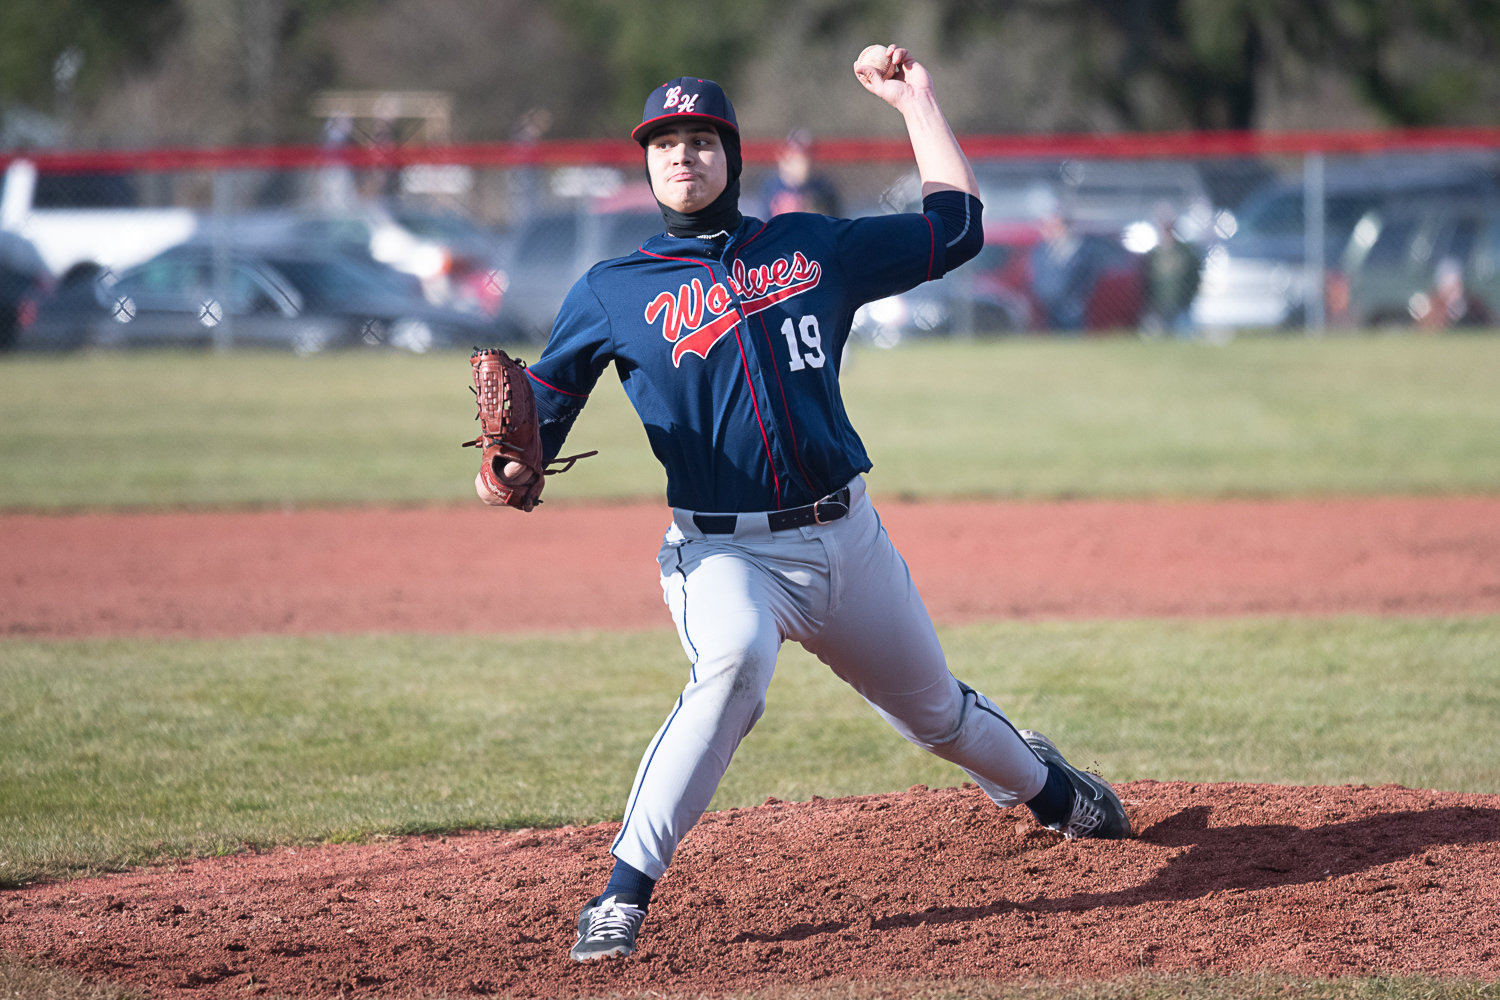 Black Hills southpaw Mark Otto throws a pitch during the Wolves' 7-4 loss at Tenino on March 14.